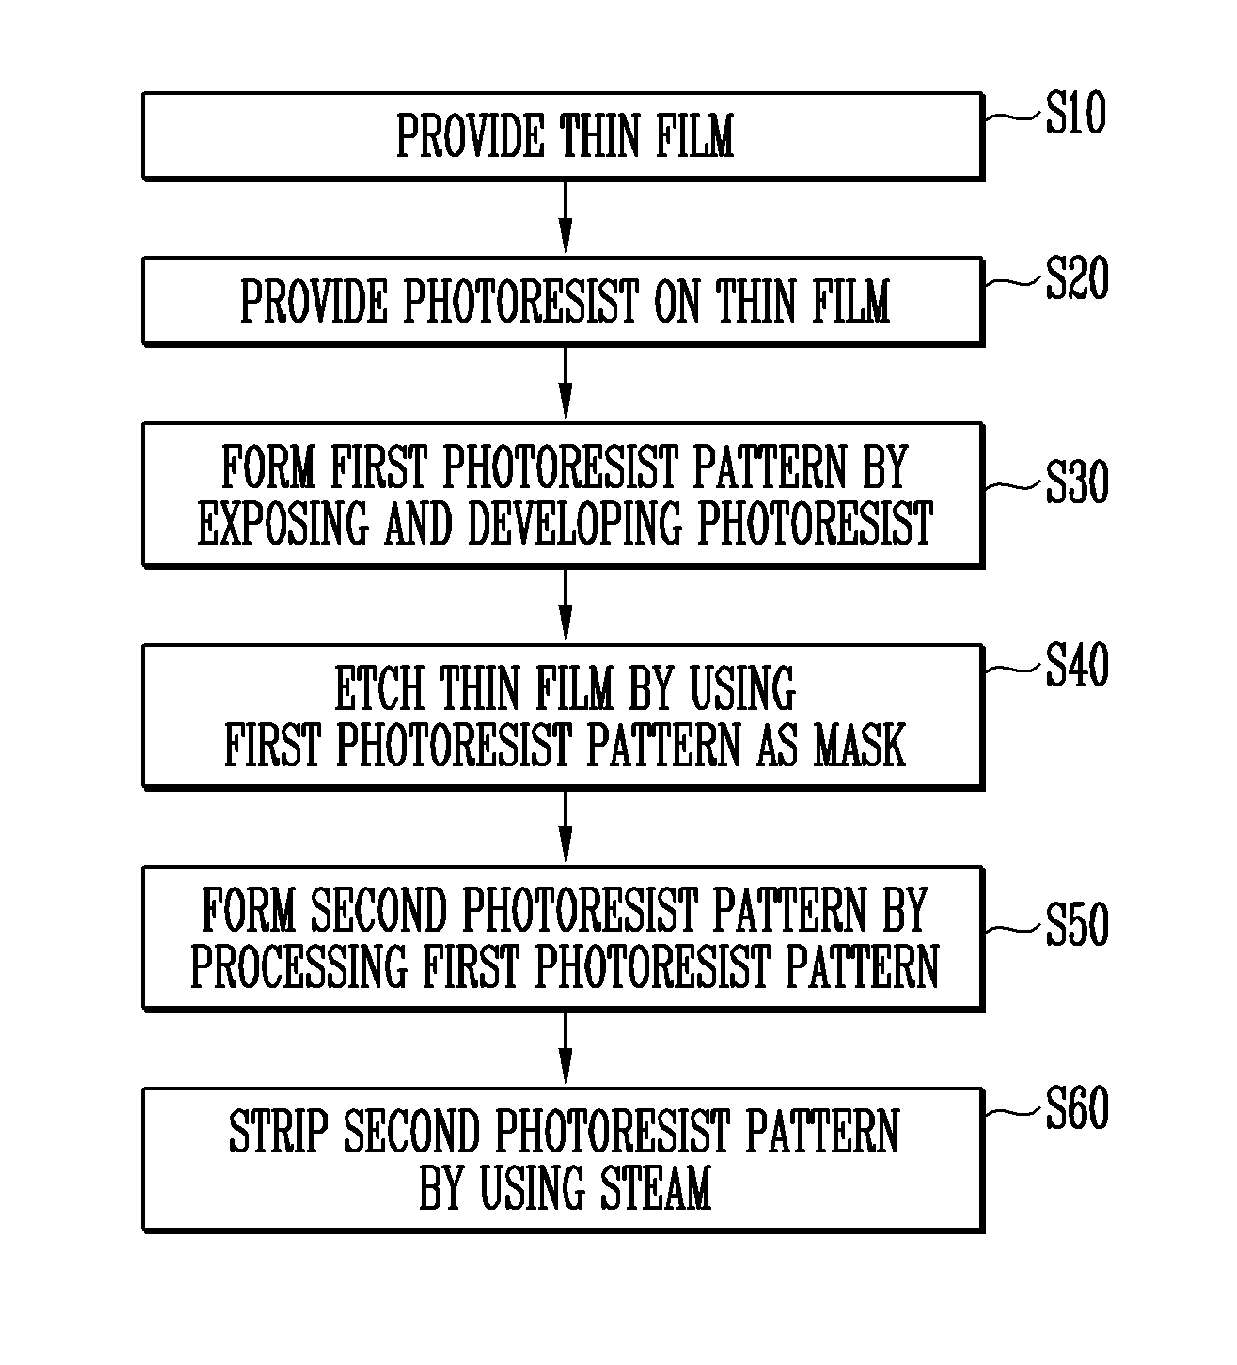 Photoresist stripping apparatus, and methods of stripping photoresist and forming thin film pattern using the same